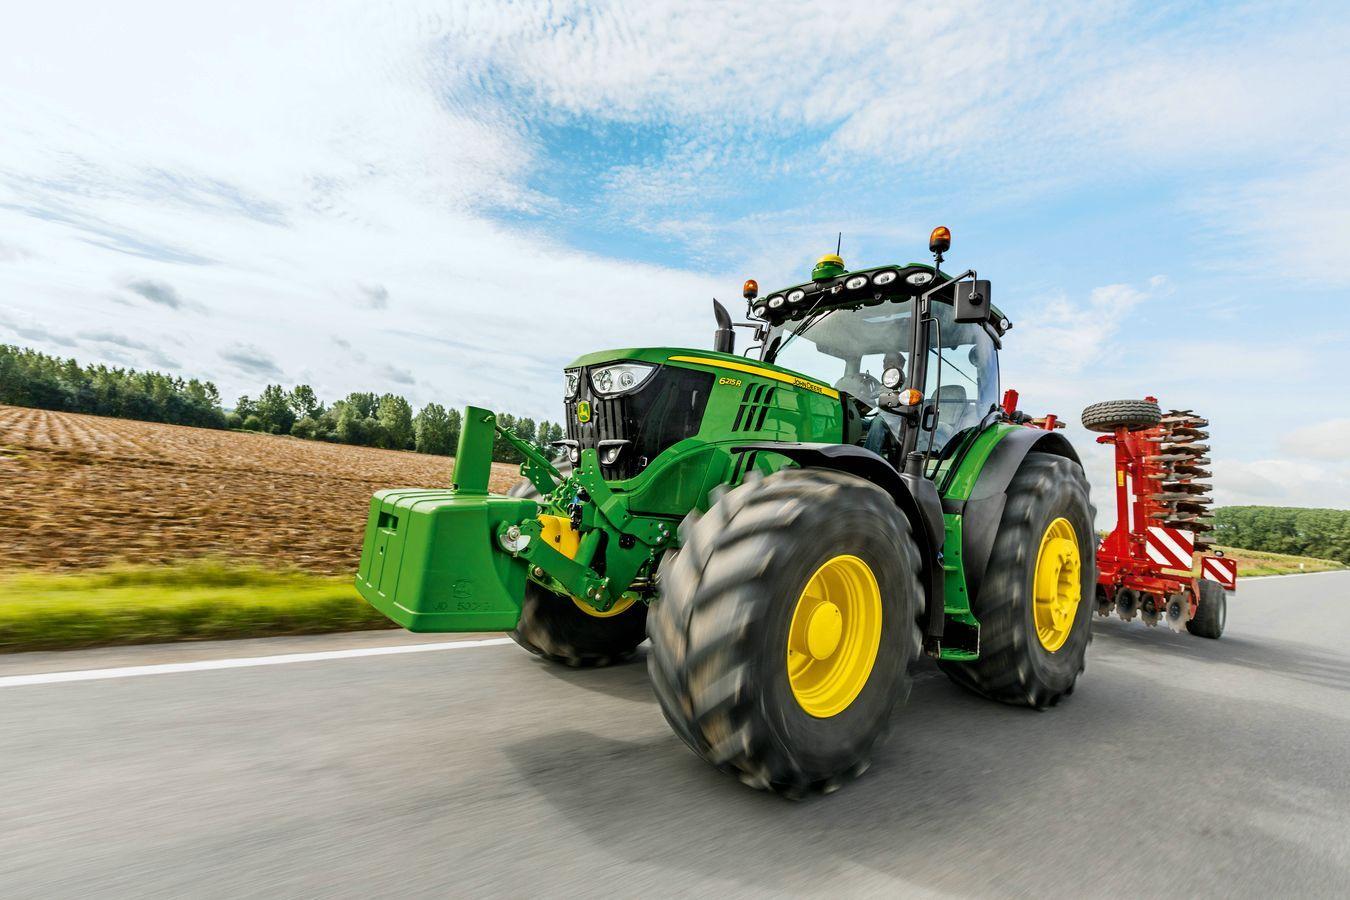 New John Deere 6R Series tractor feature Stage IV engines